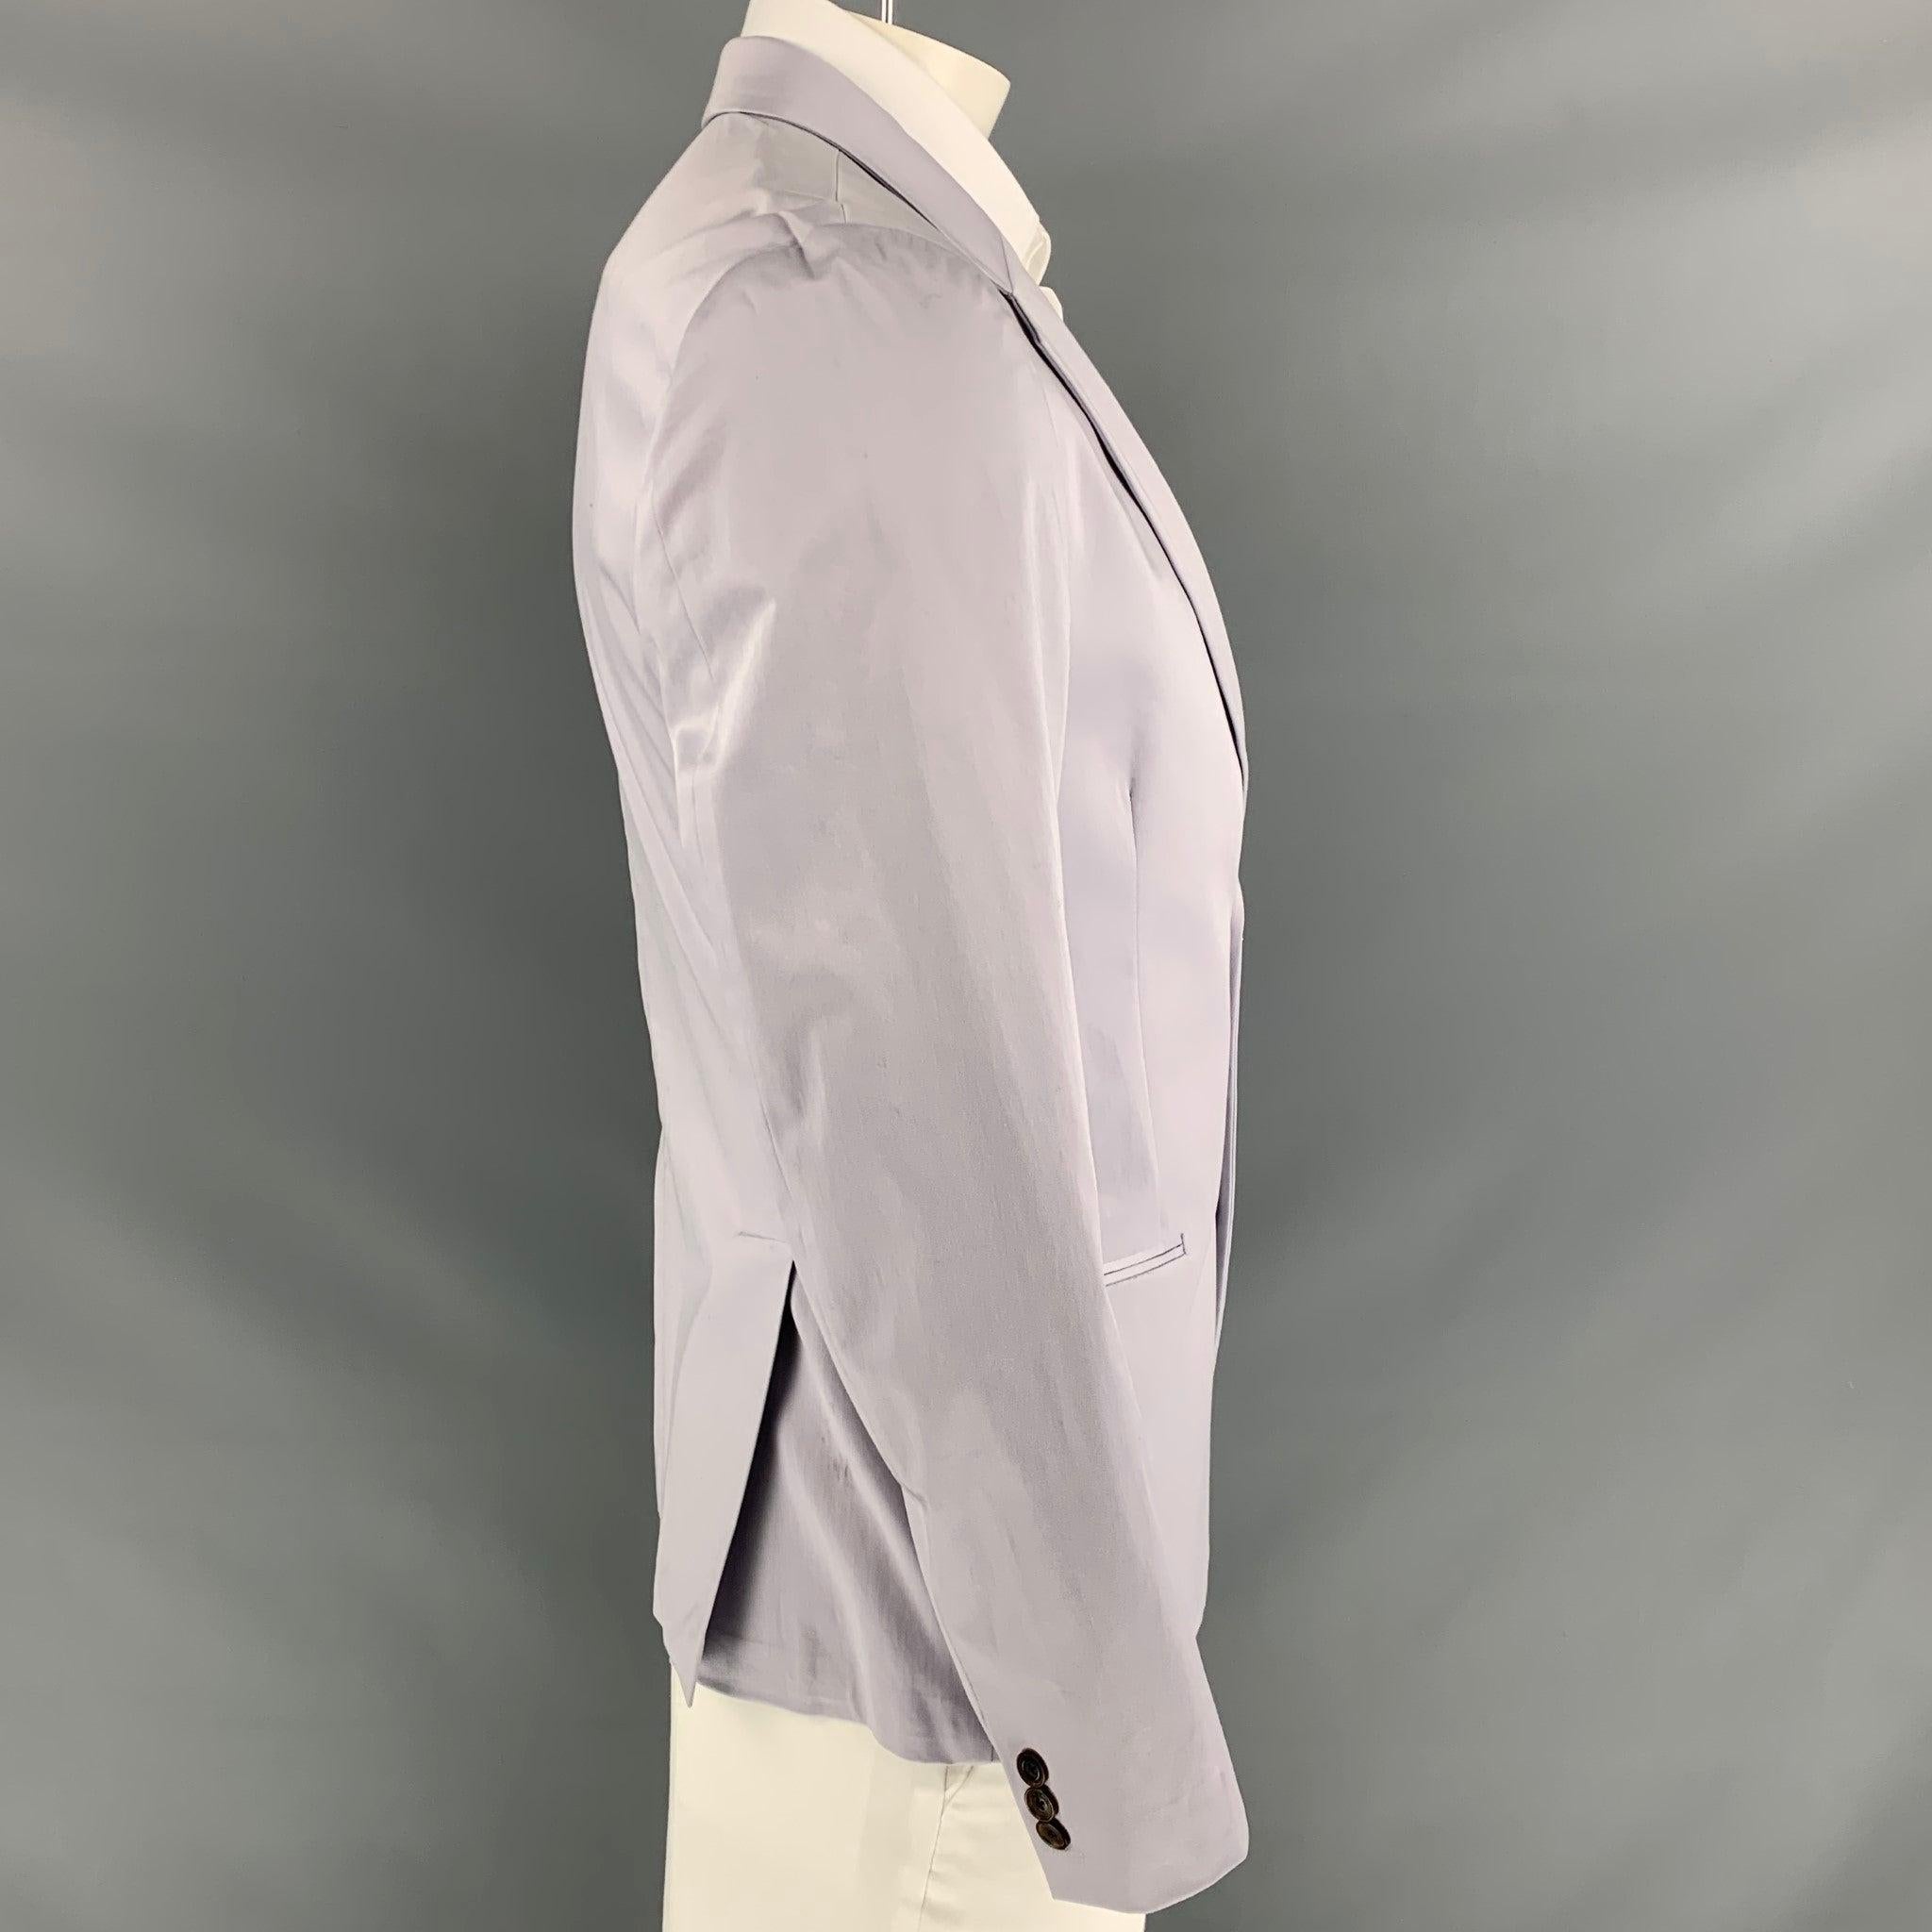 PAUL SMITH Soho Fit Size 44 Regular Lilac Cotton Notch Lapel Sport Coat In Good Condition For Sale In San Francisco, CA